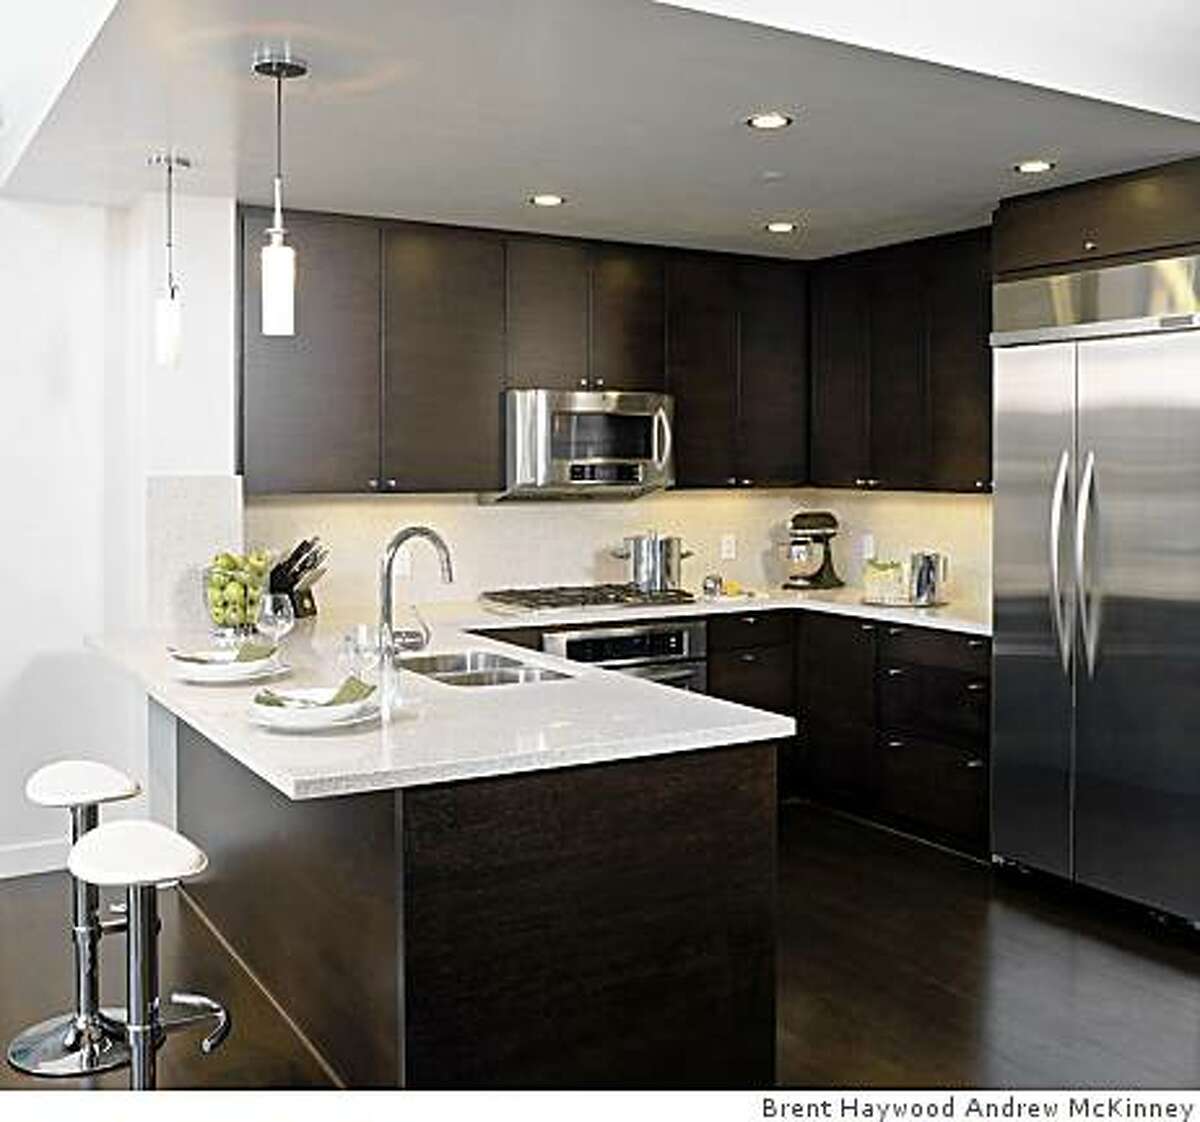 High-end appliance in kitchen of the the $2 million 8th-floor models of the Radiance, a 99-unit project in Misison BayPicture 021